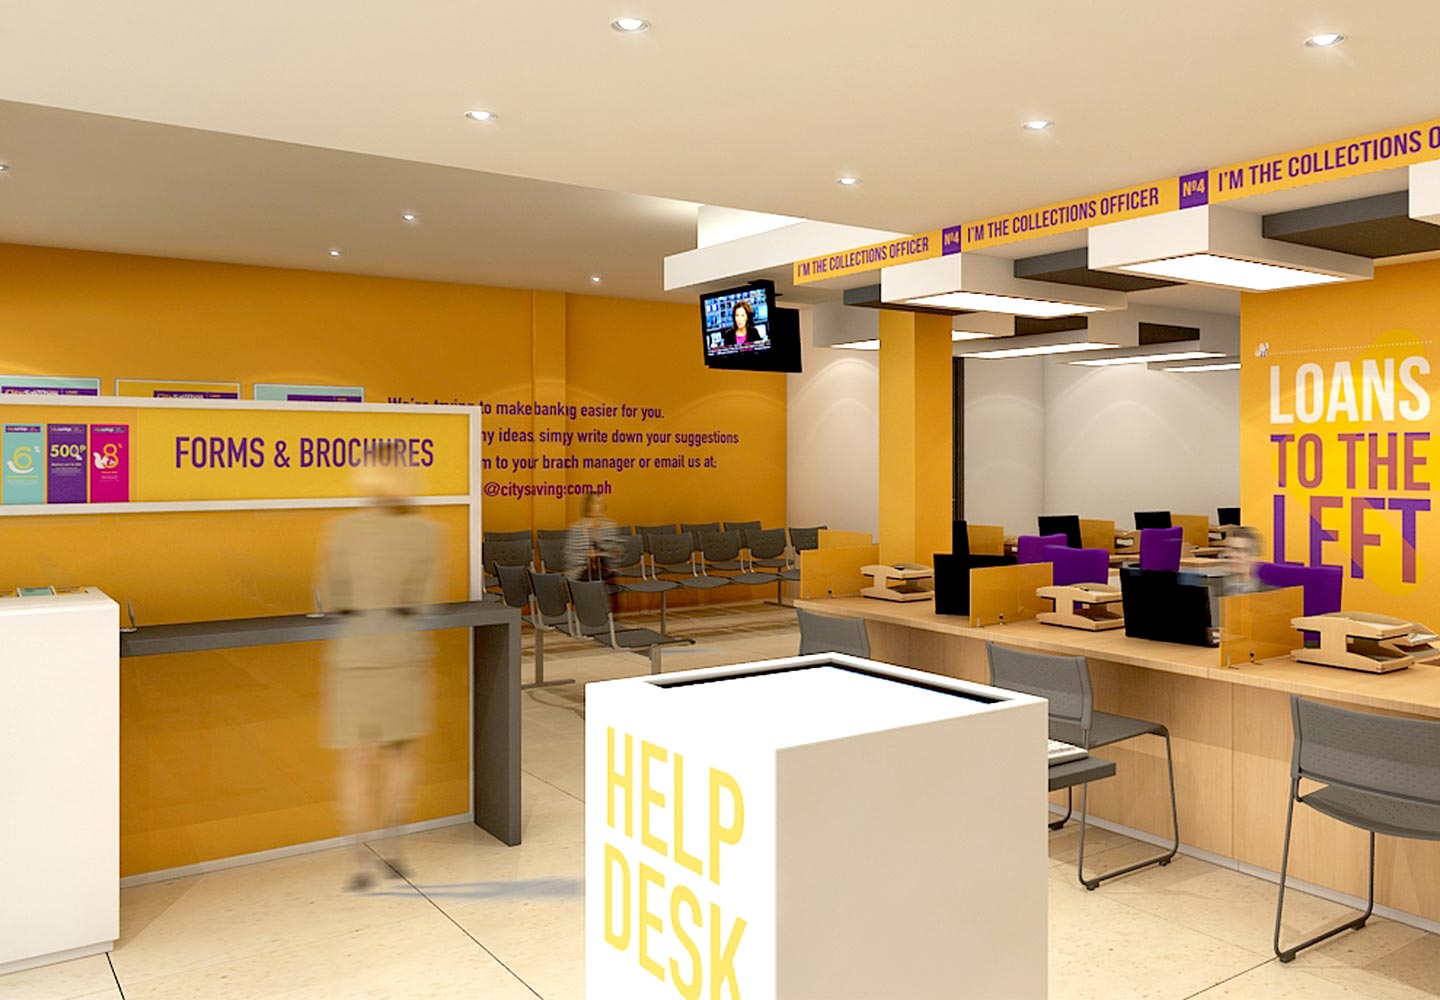 Brand Consultancy in Financial Services Industry. Office design for City Savings Bank.